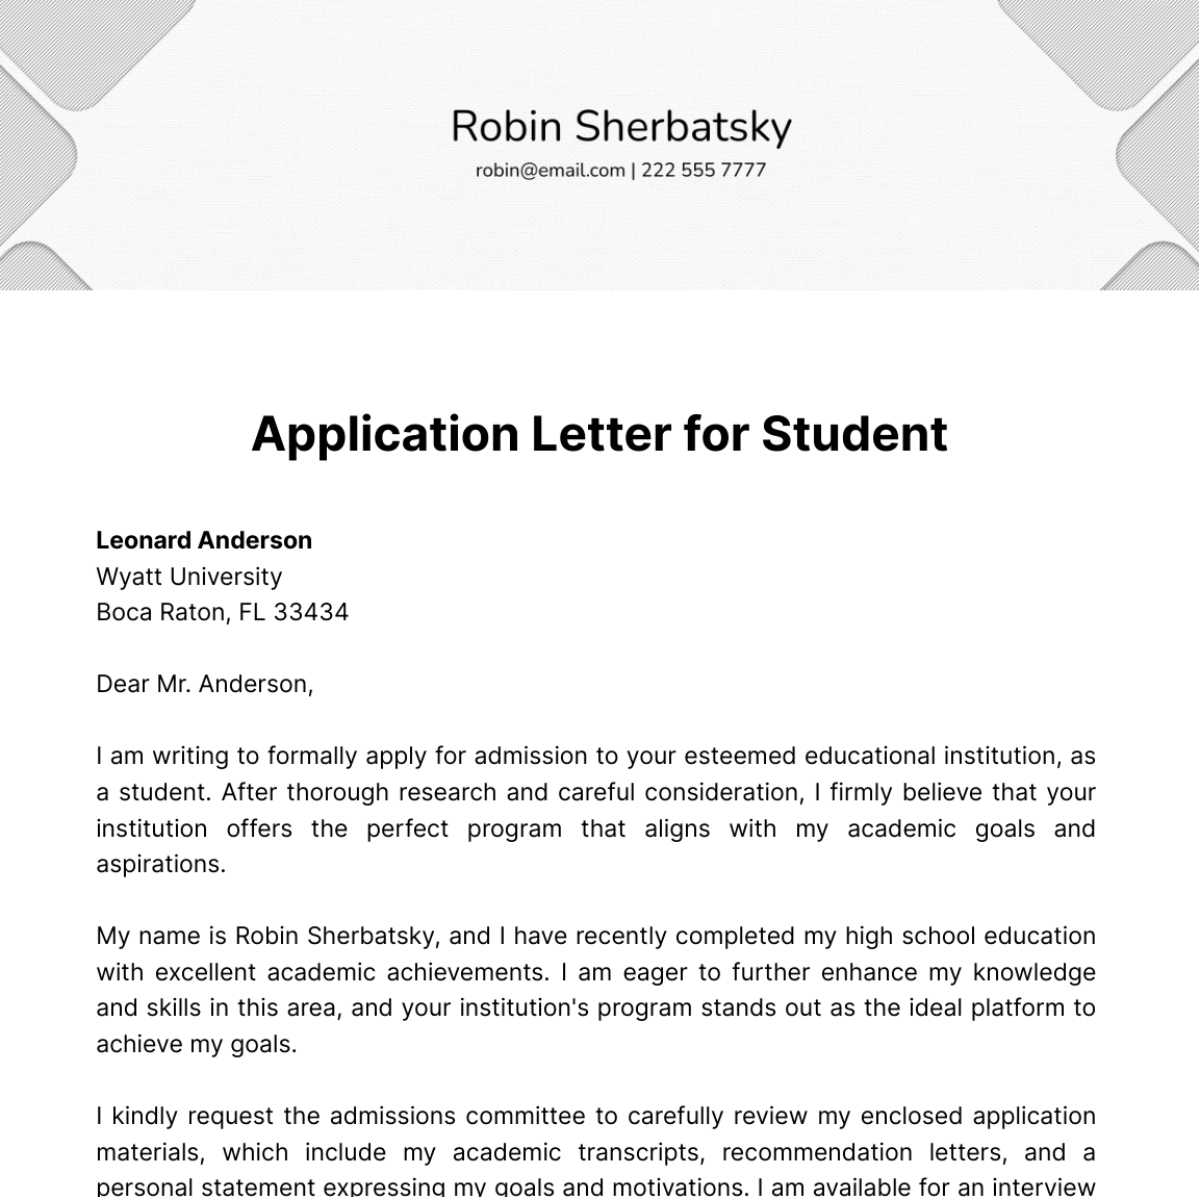 Application Letter for Student  Template